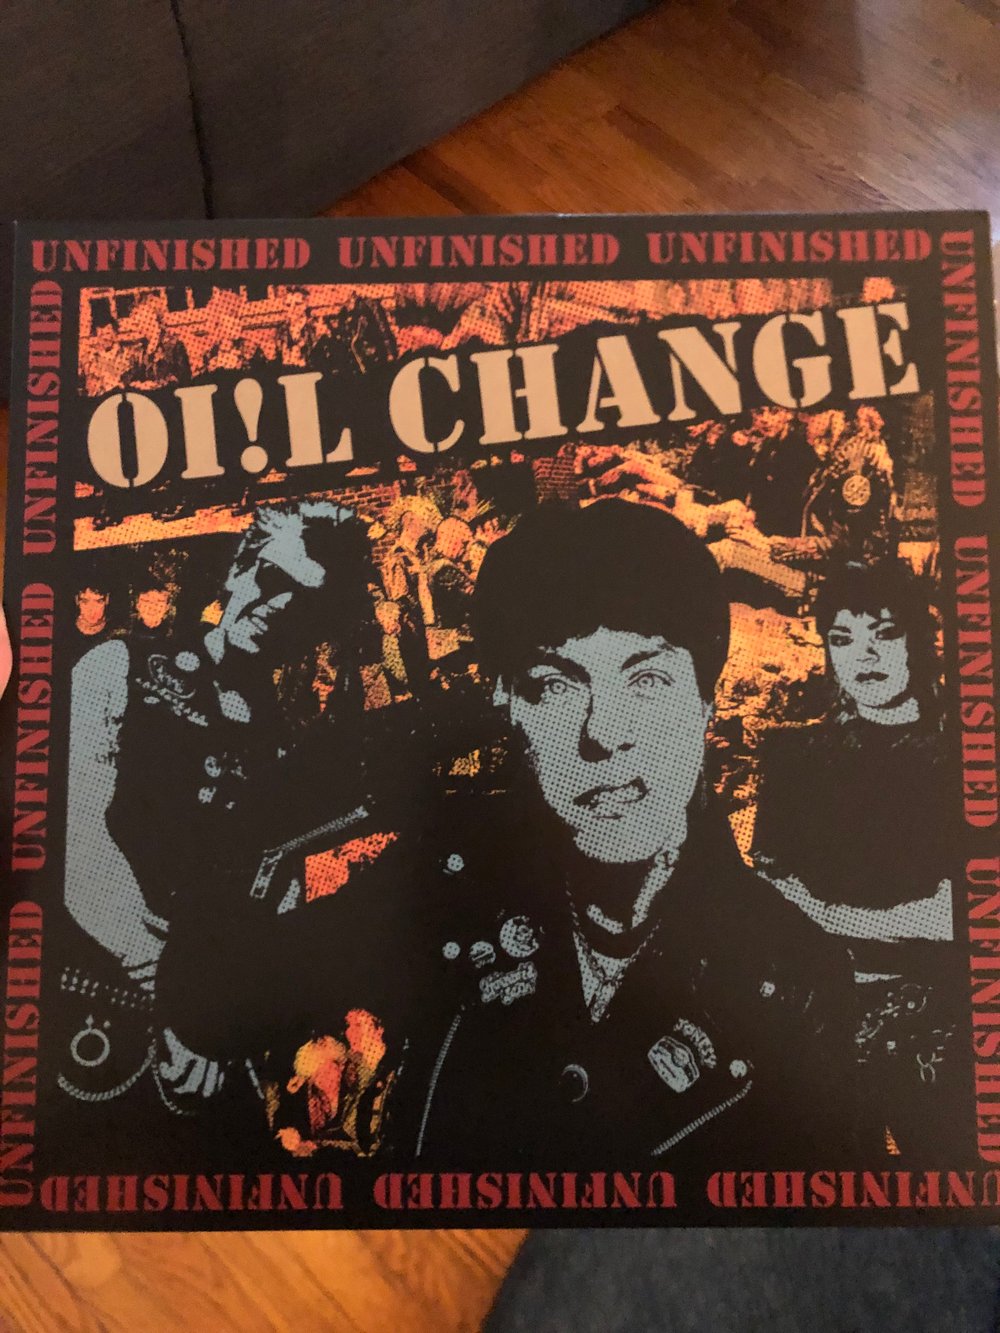 Oi!L Change - "Unfinished” LP (ALMOST GONE!!)